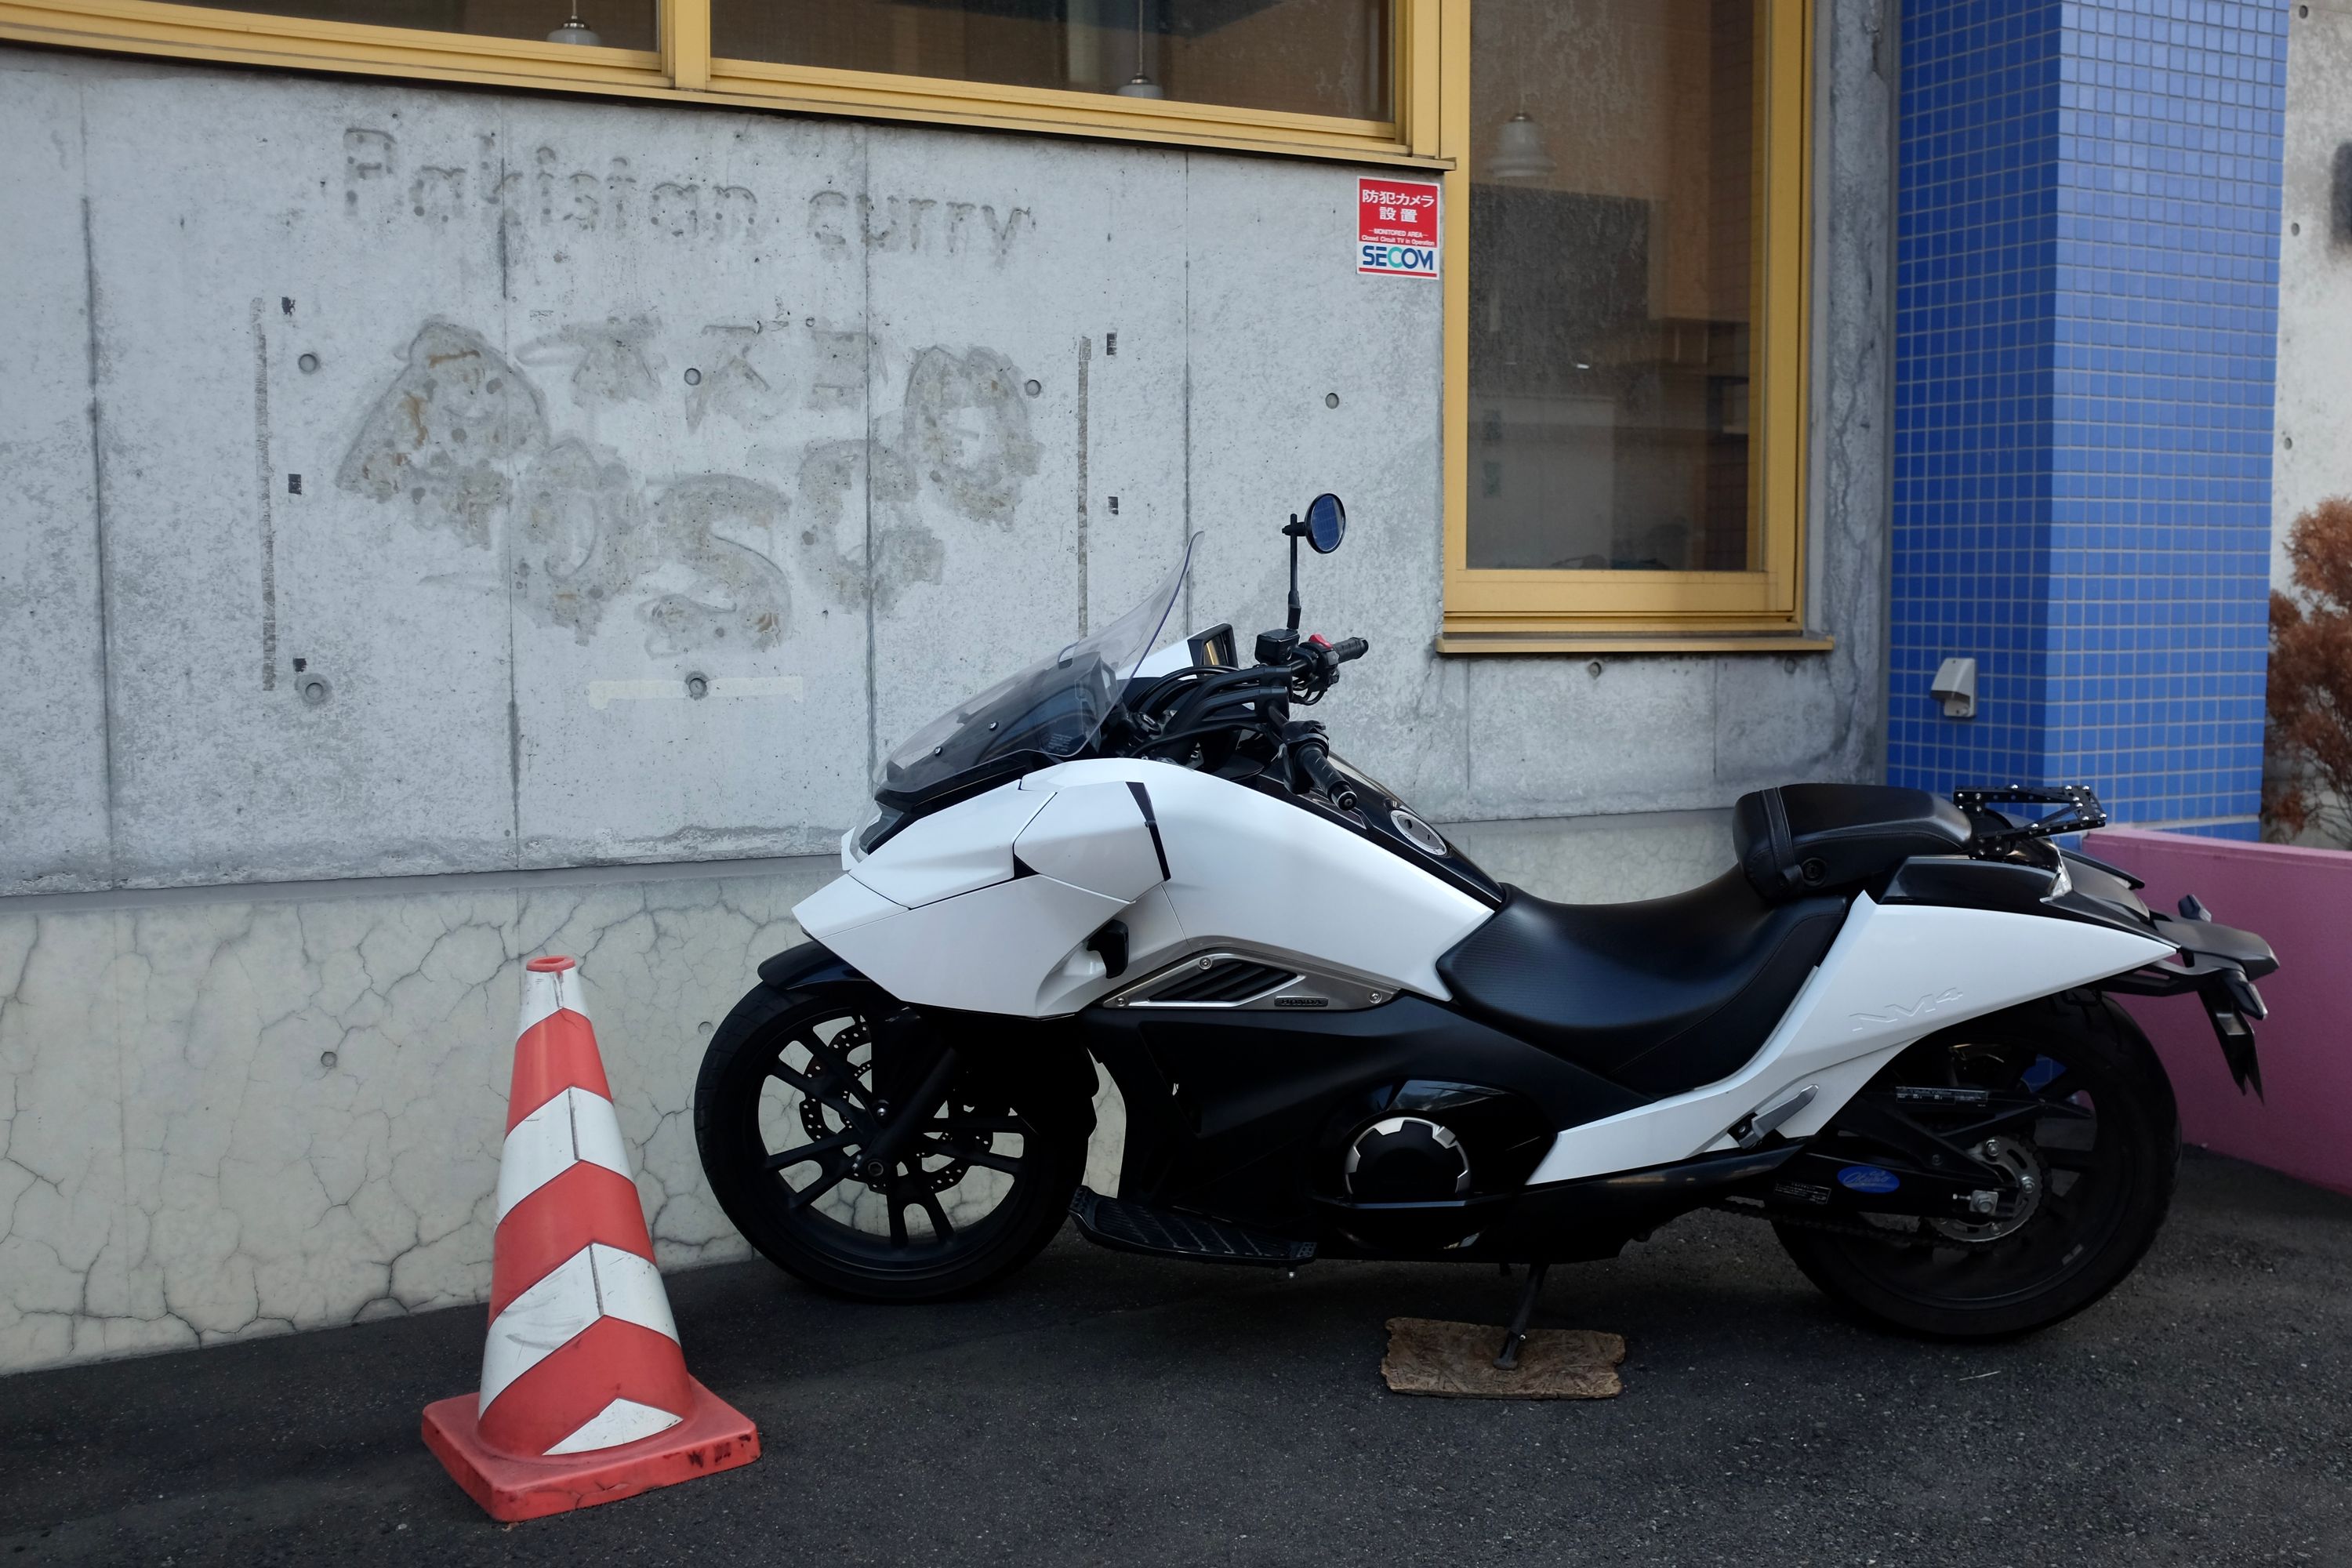 A futuristic-looking white motorcycle parked in front of a concrete wall with the faded sign “Pakistan curry”.